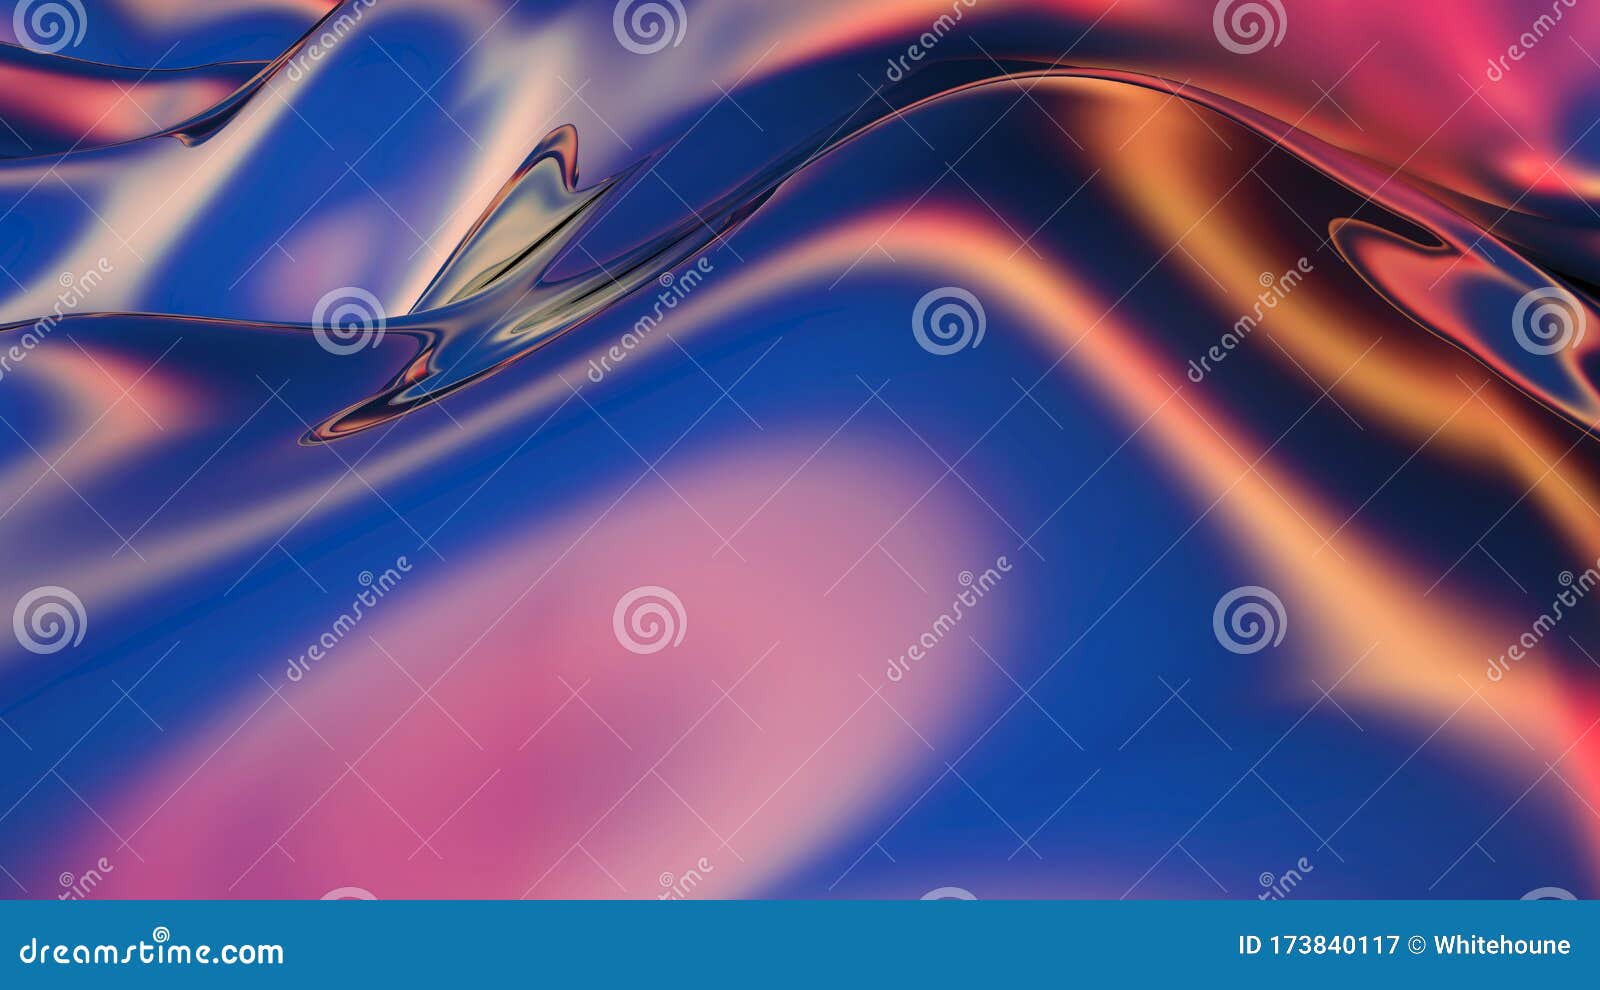 abstract digital background with smooth gradients in trendy colors